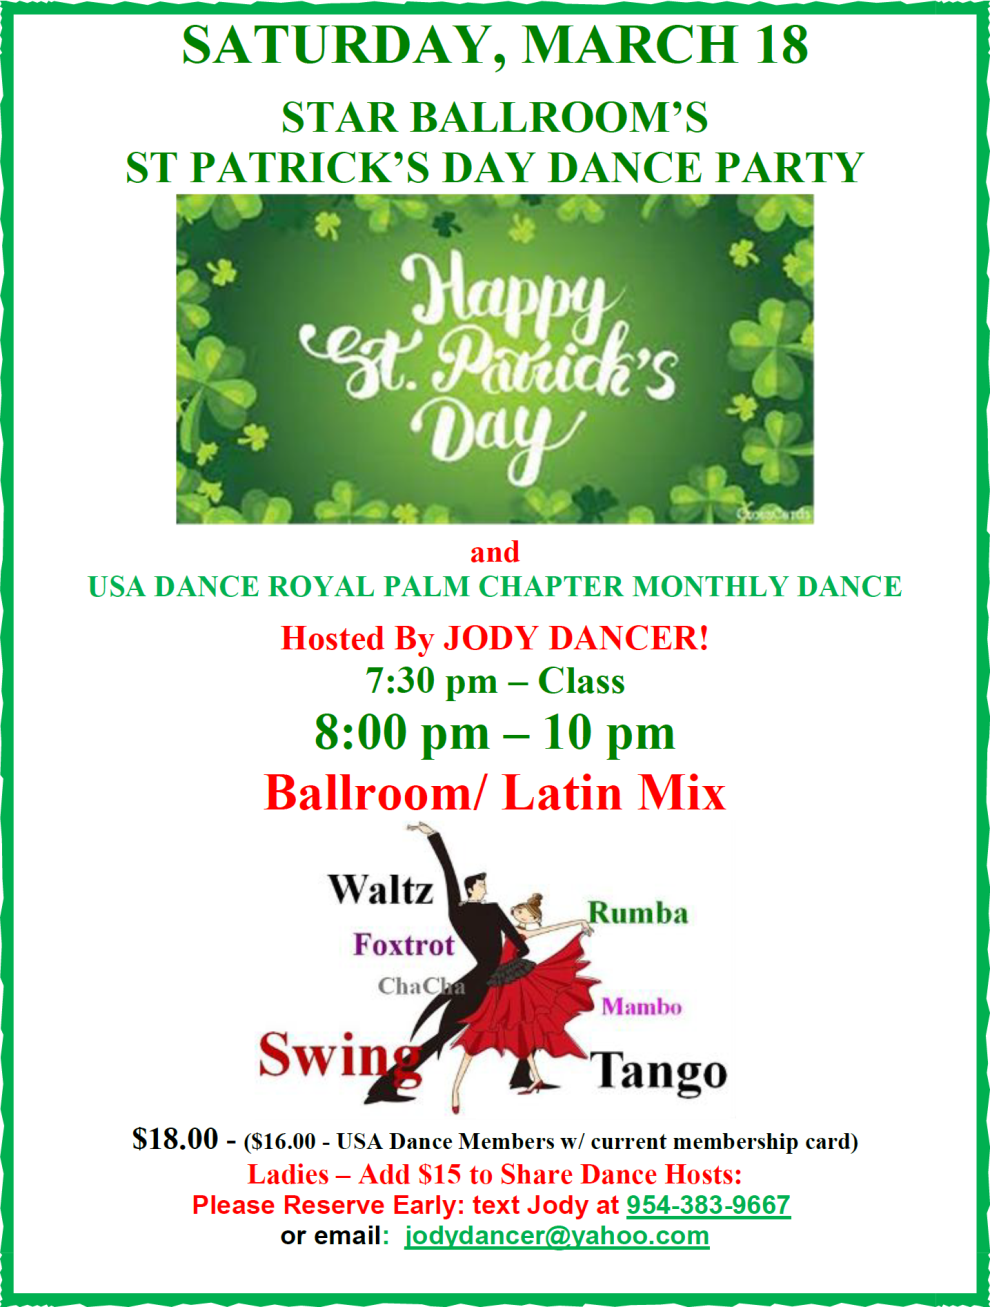 Star Ballroom St. Patrick's Day Dance Party - March 18, 2023